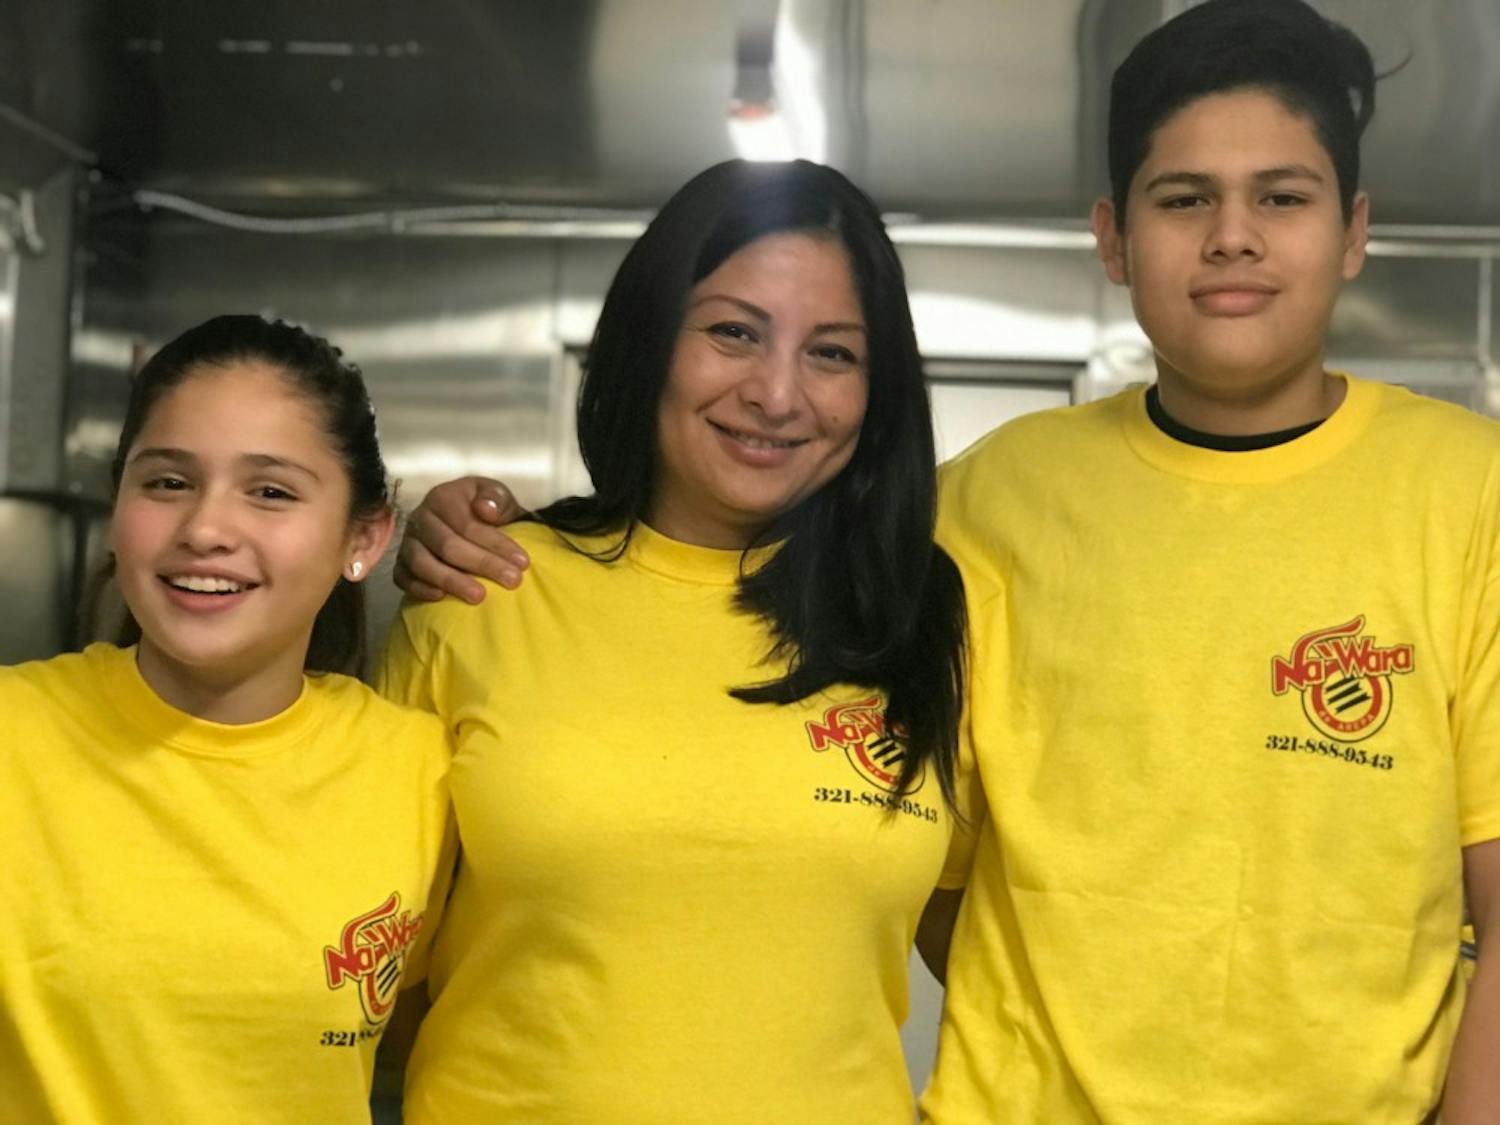 Patricia Fidhel poses with her children, Leonardo and Alexandra, inside their arepa food truck. Photo contributed by David Moncada.